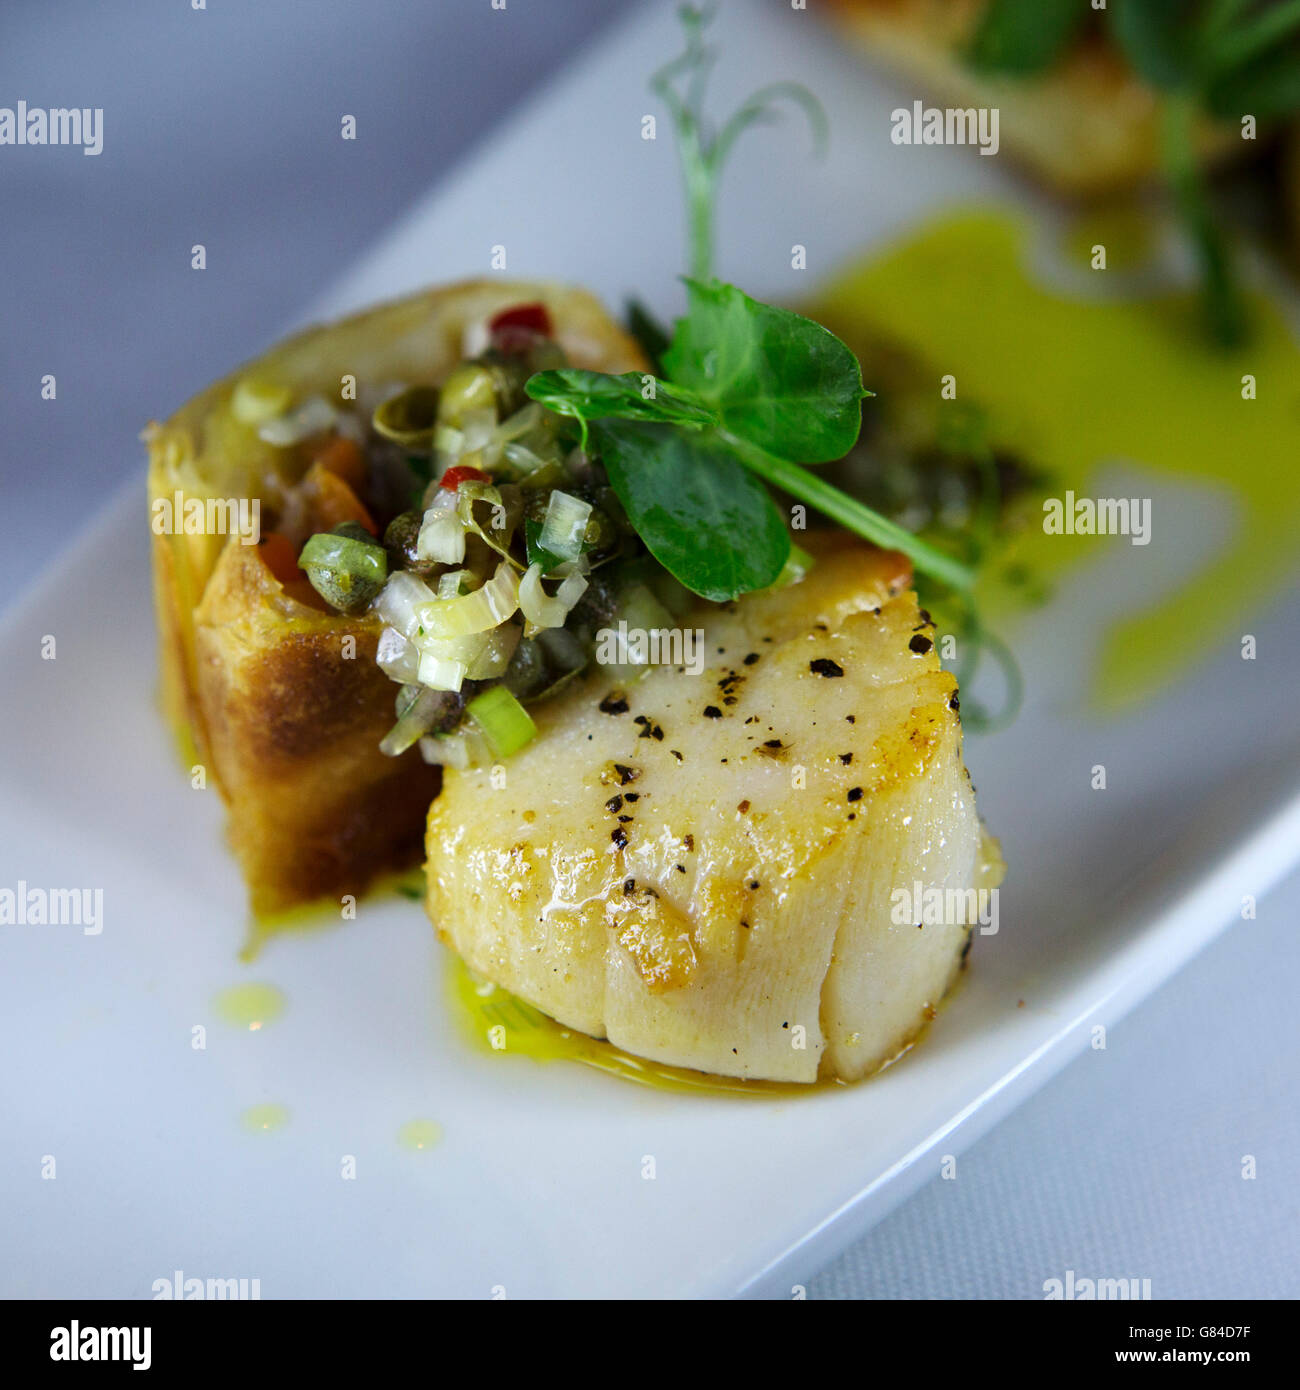 Scallop and seasonal vegetables served in Northumberland, England. Stock Photo